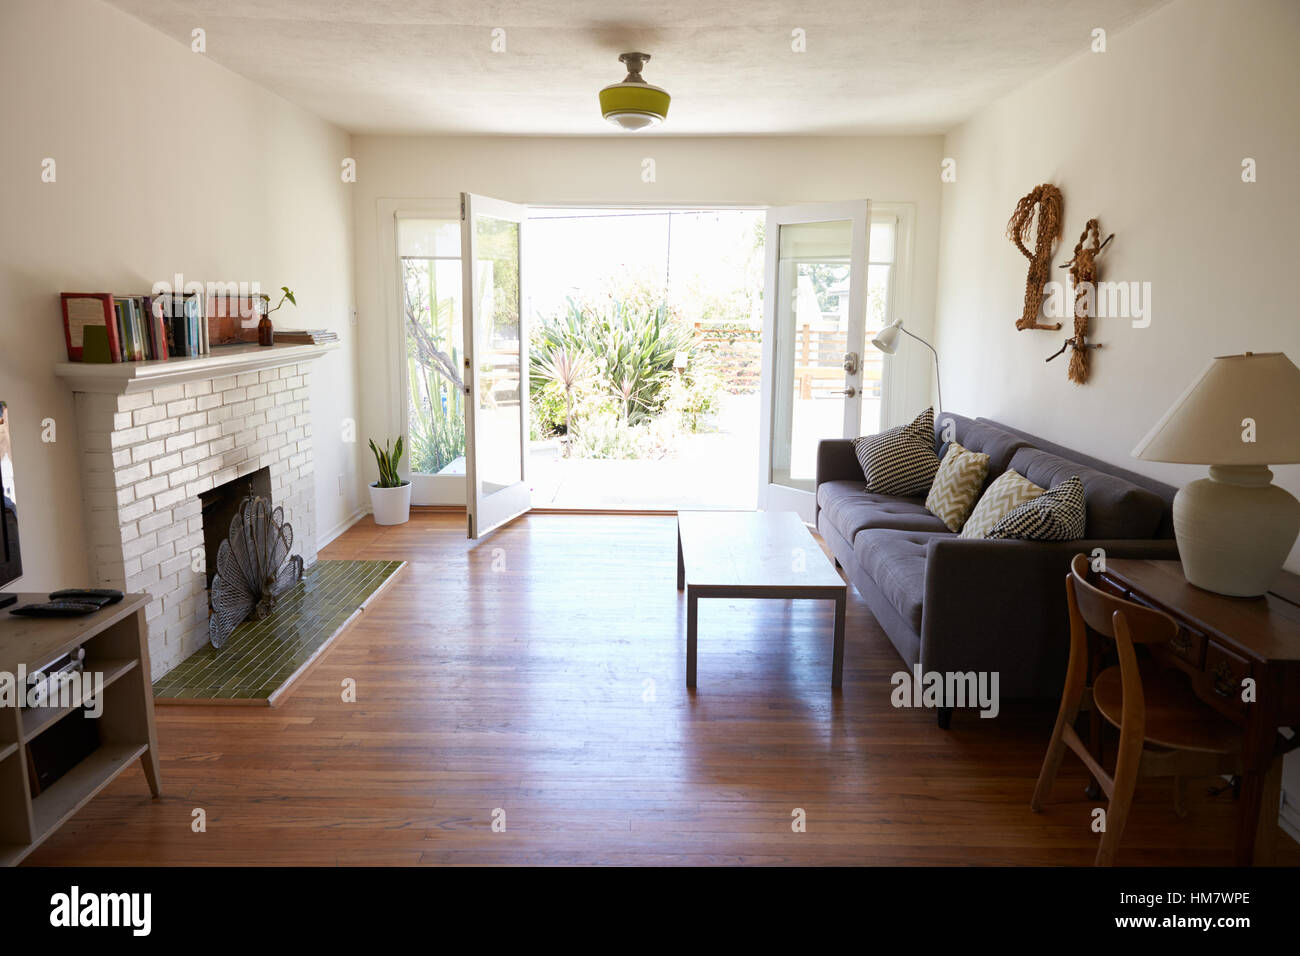 Interior Of Modern Lounge With Open French Windows To Garden Stock Photo